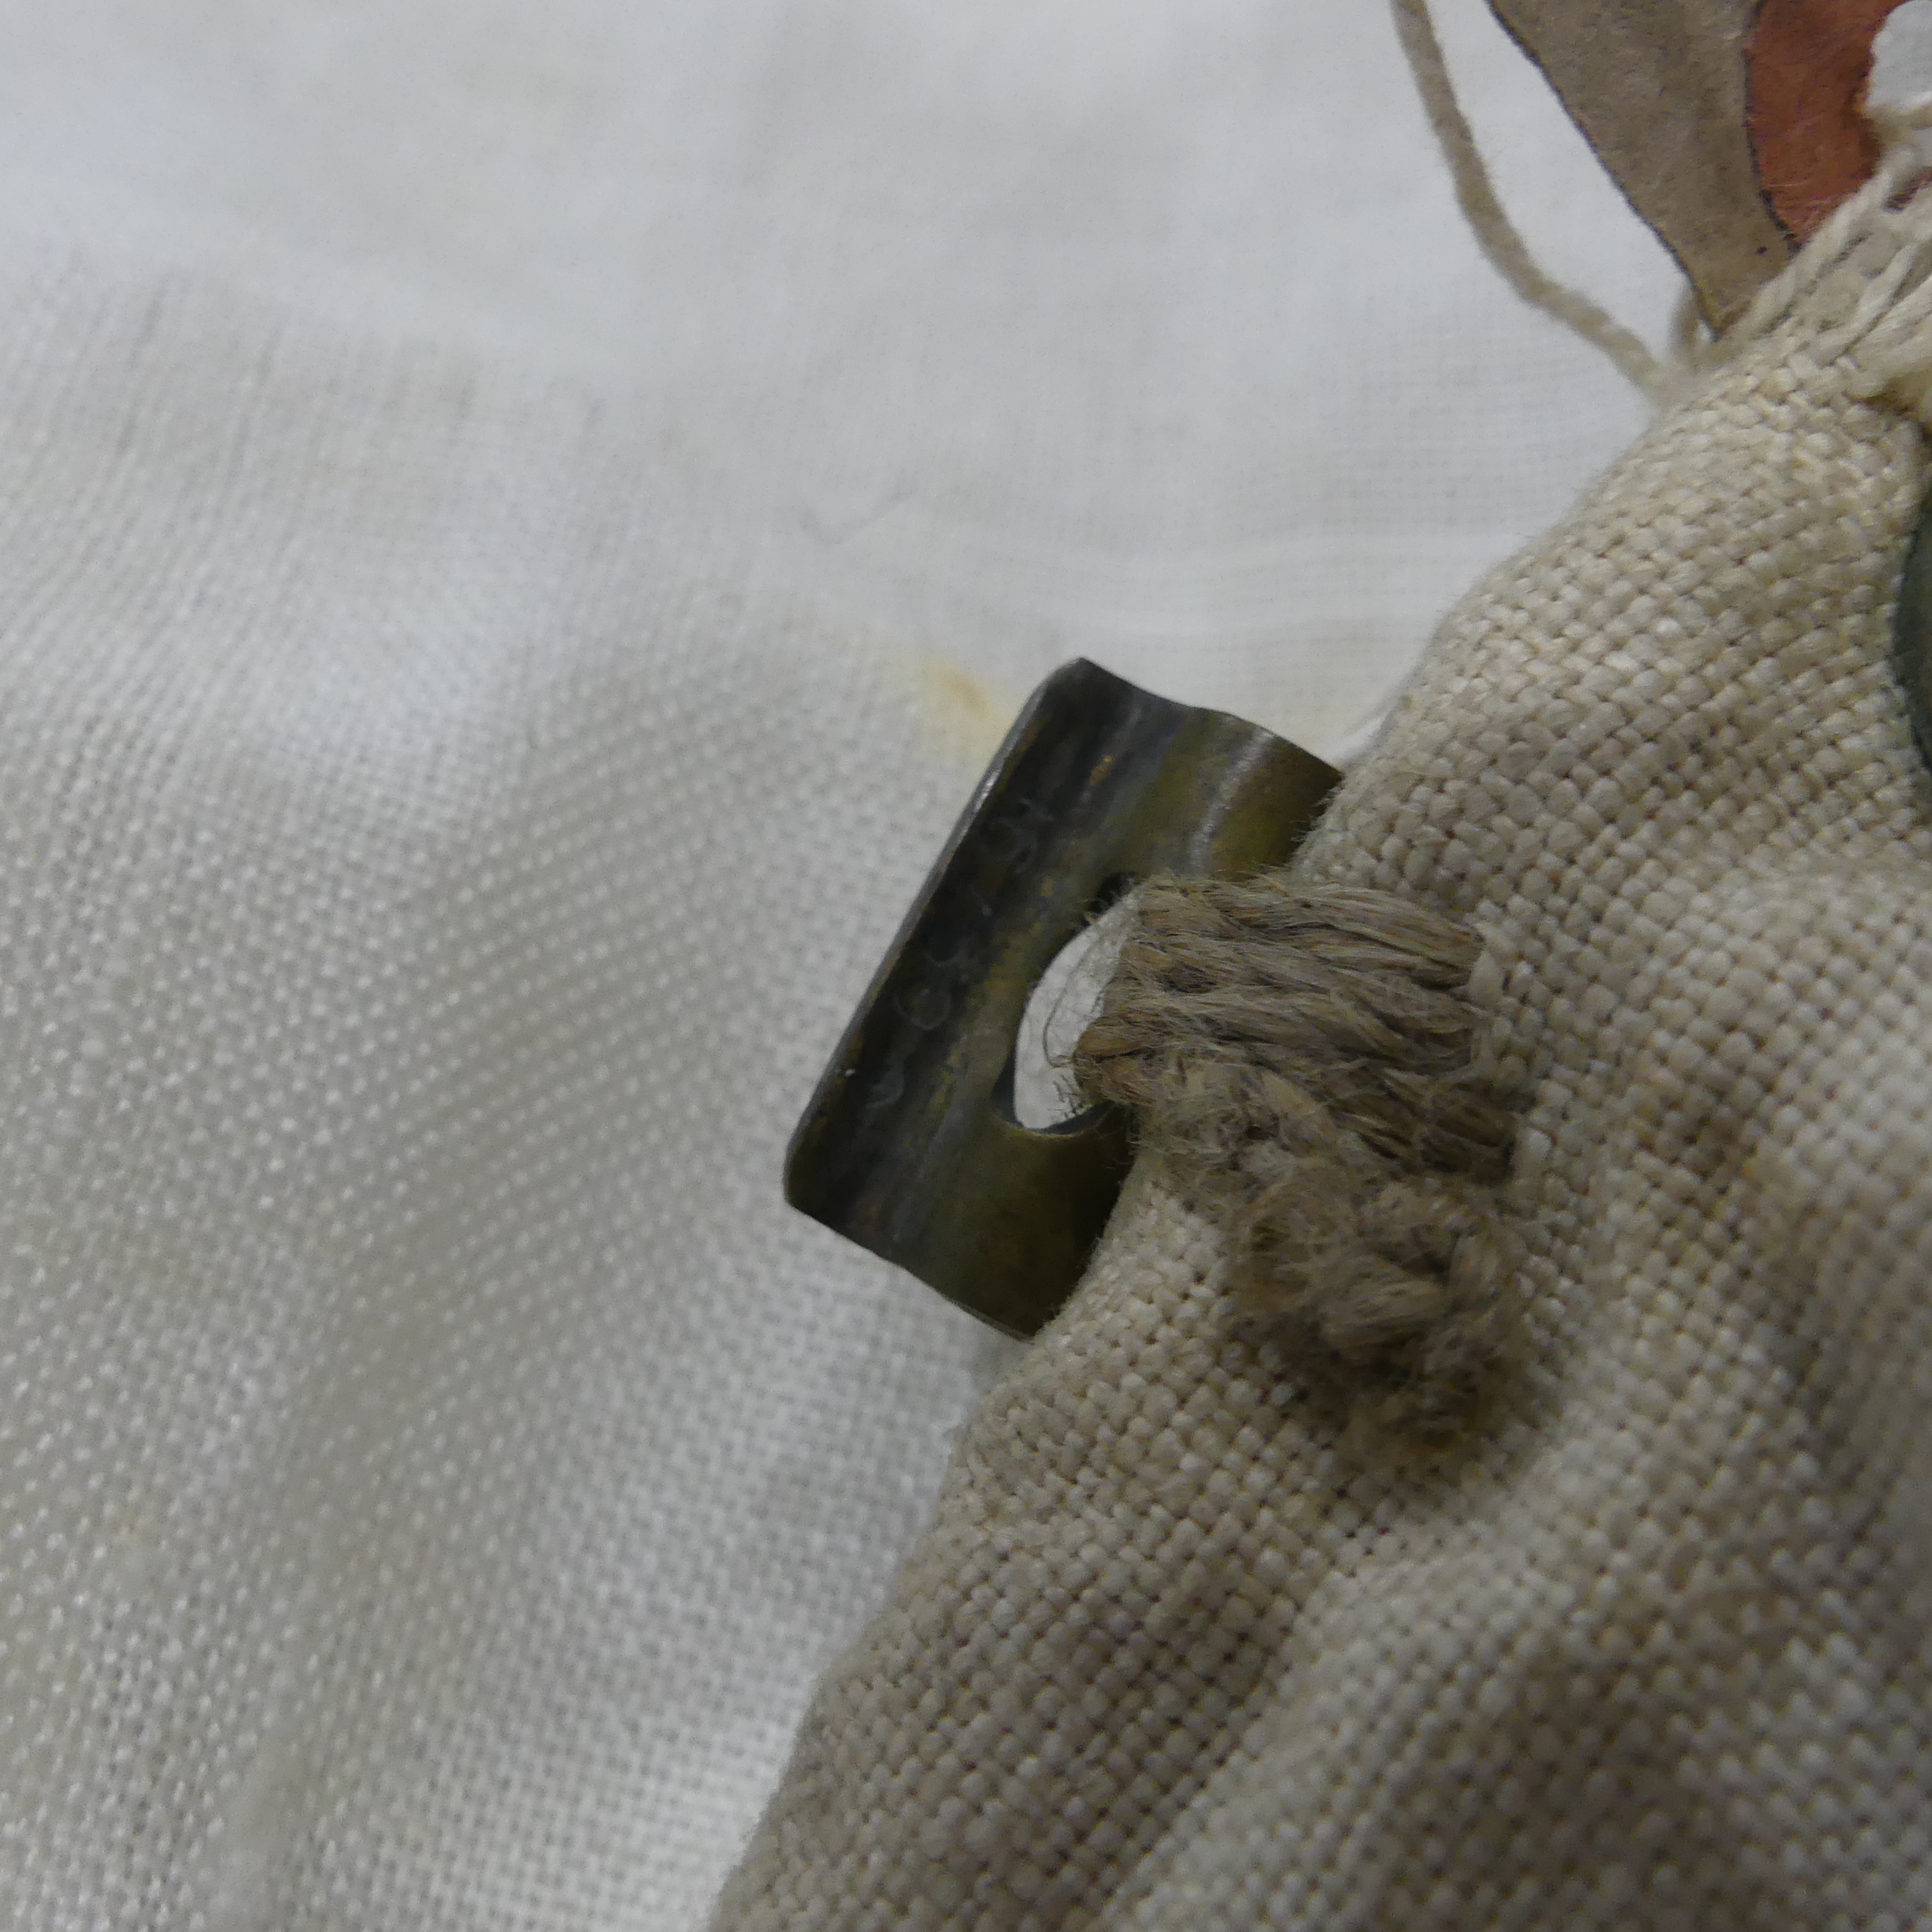 A WWII period British Royal Navy white ensign ship's Flag, with rope and metal attachments - Image 3 of 7